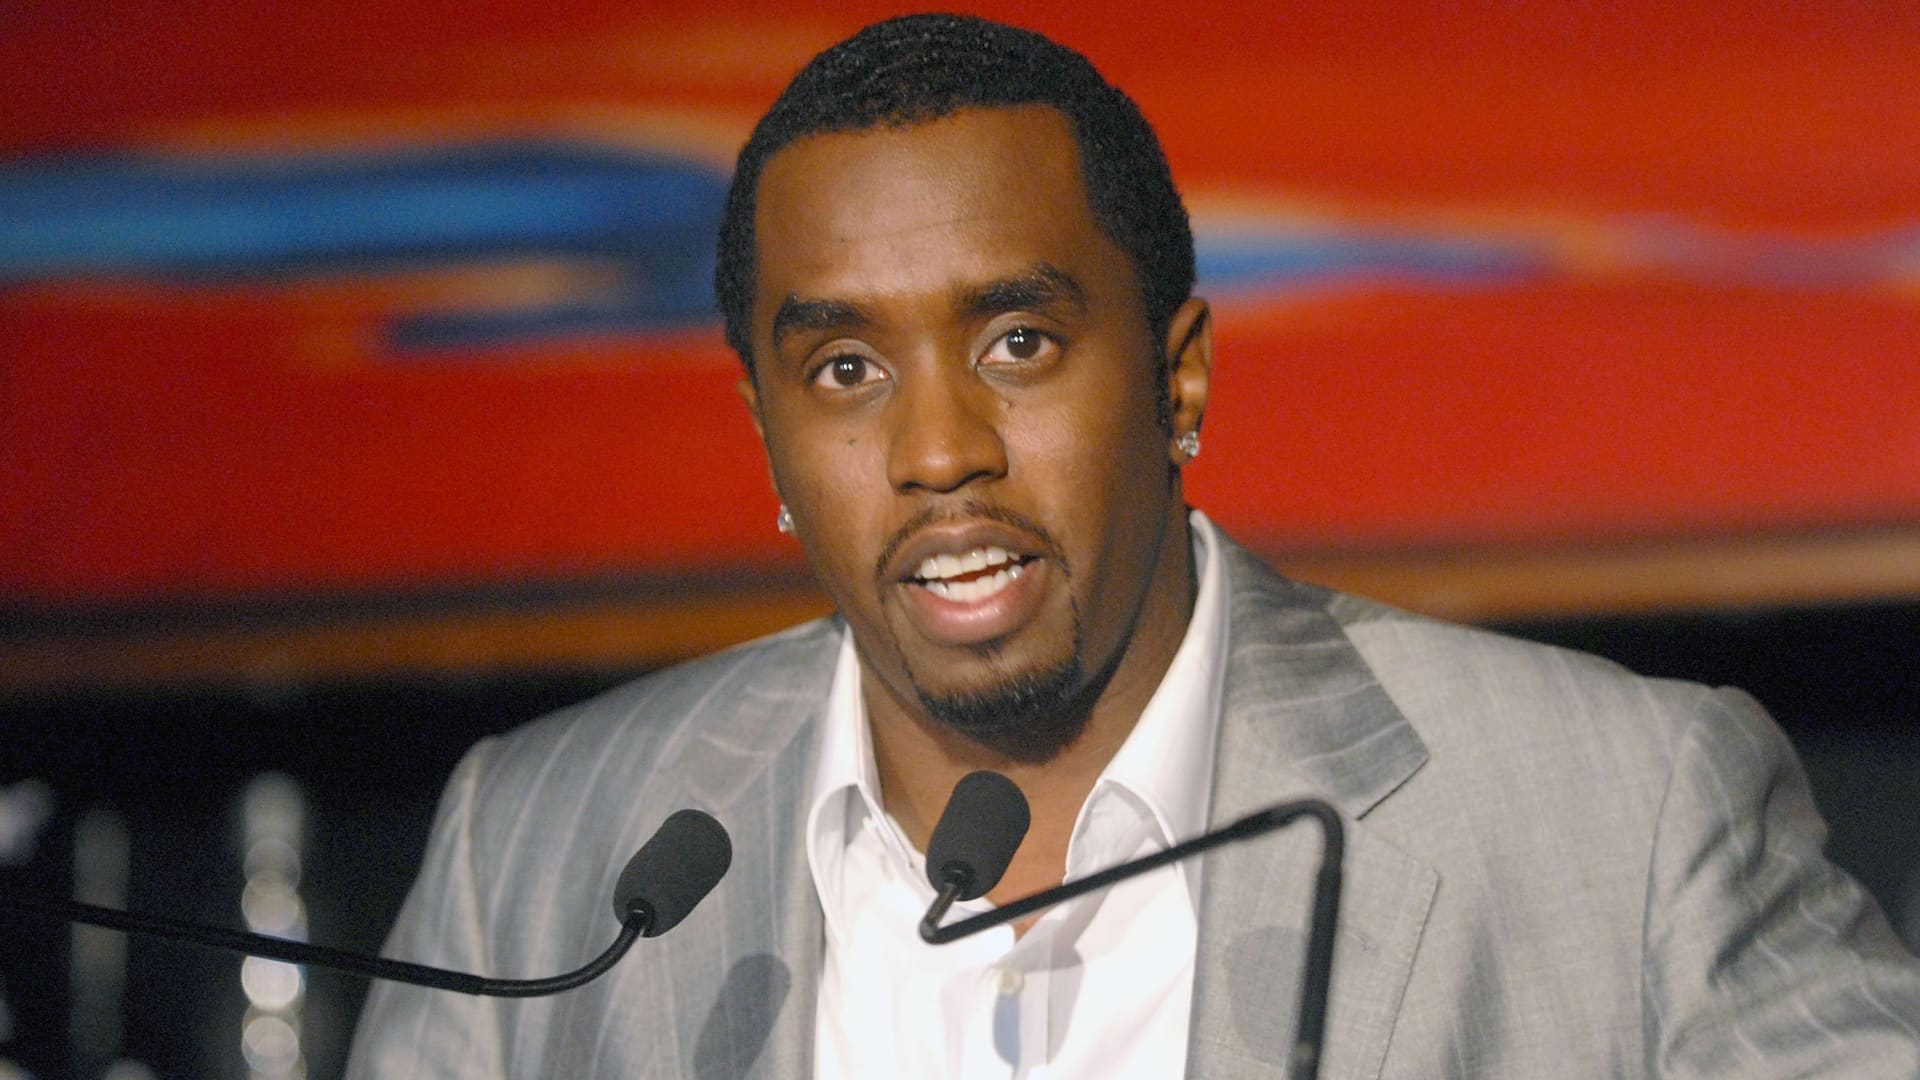 Music mogul Sean ‘Diddy’ Combs sued for rape, sex trafficking